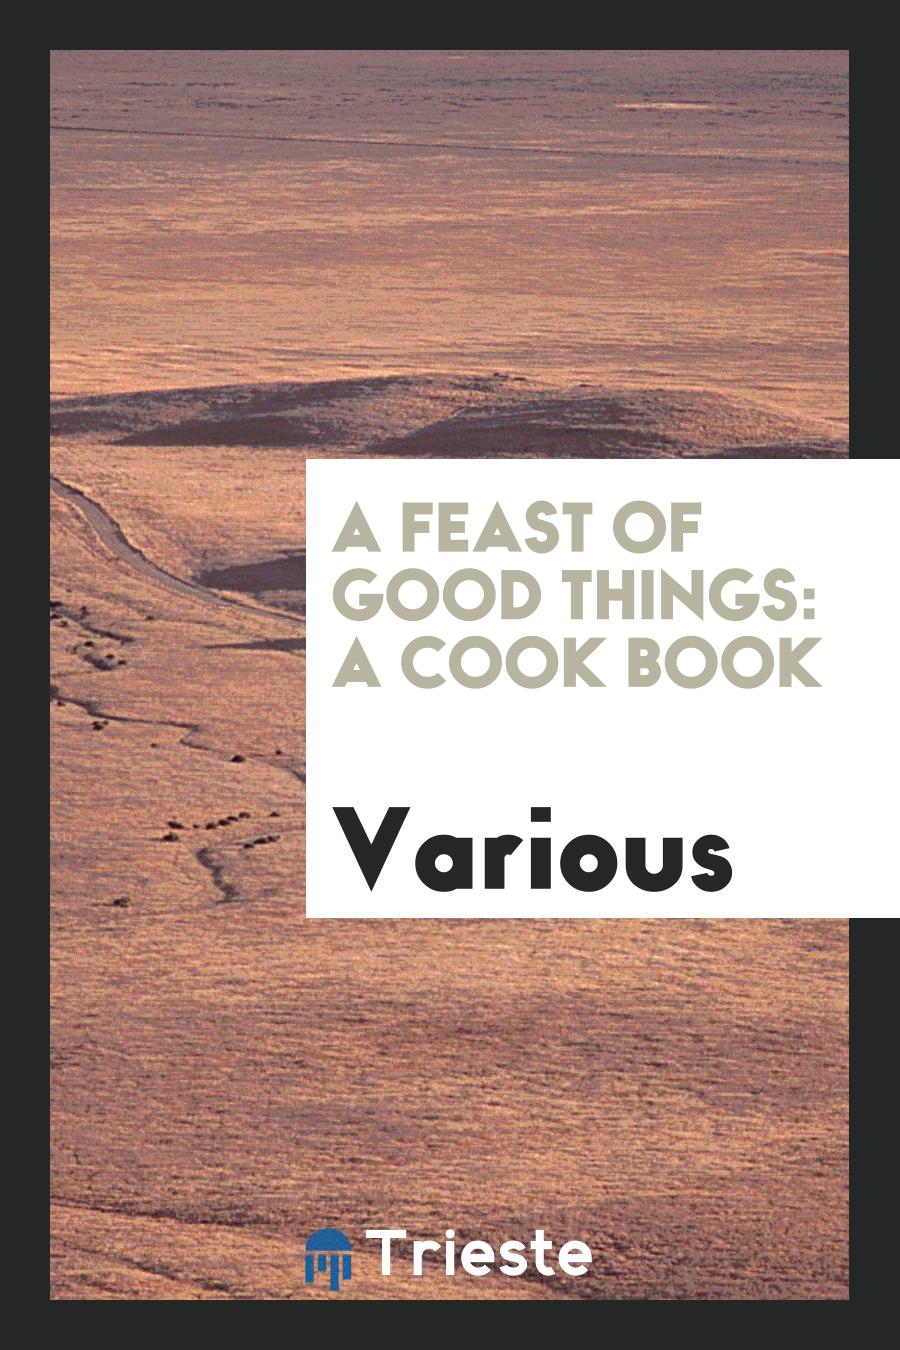 A Feast of Good Things: A Cook Book